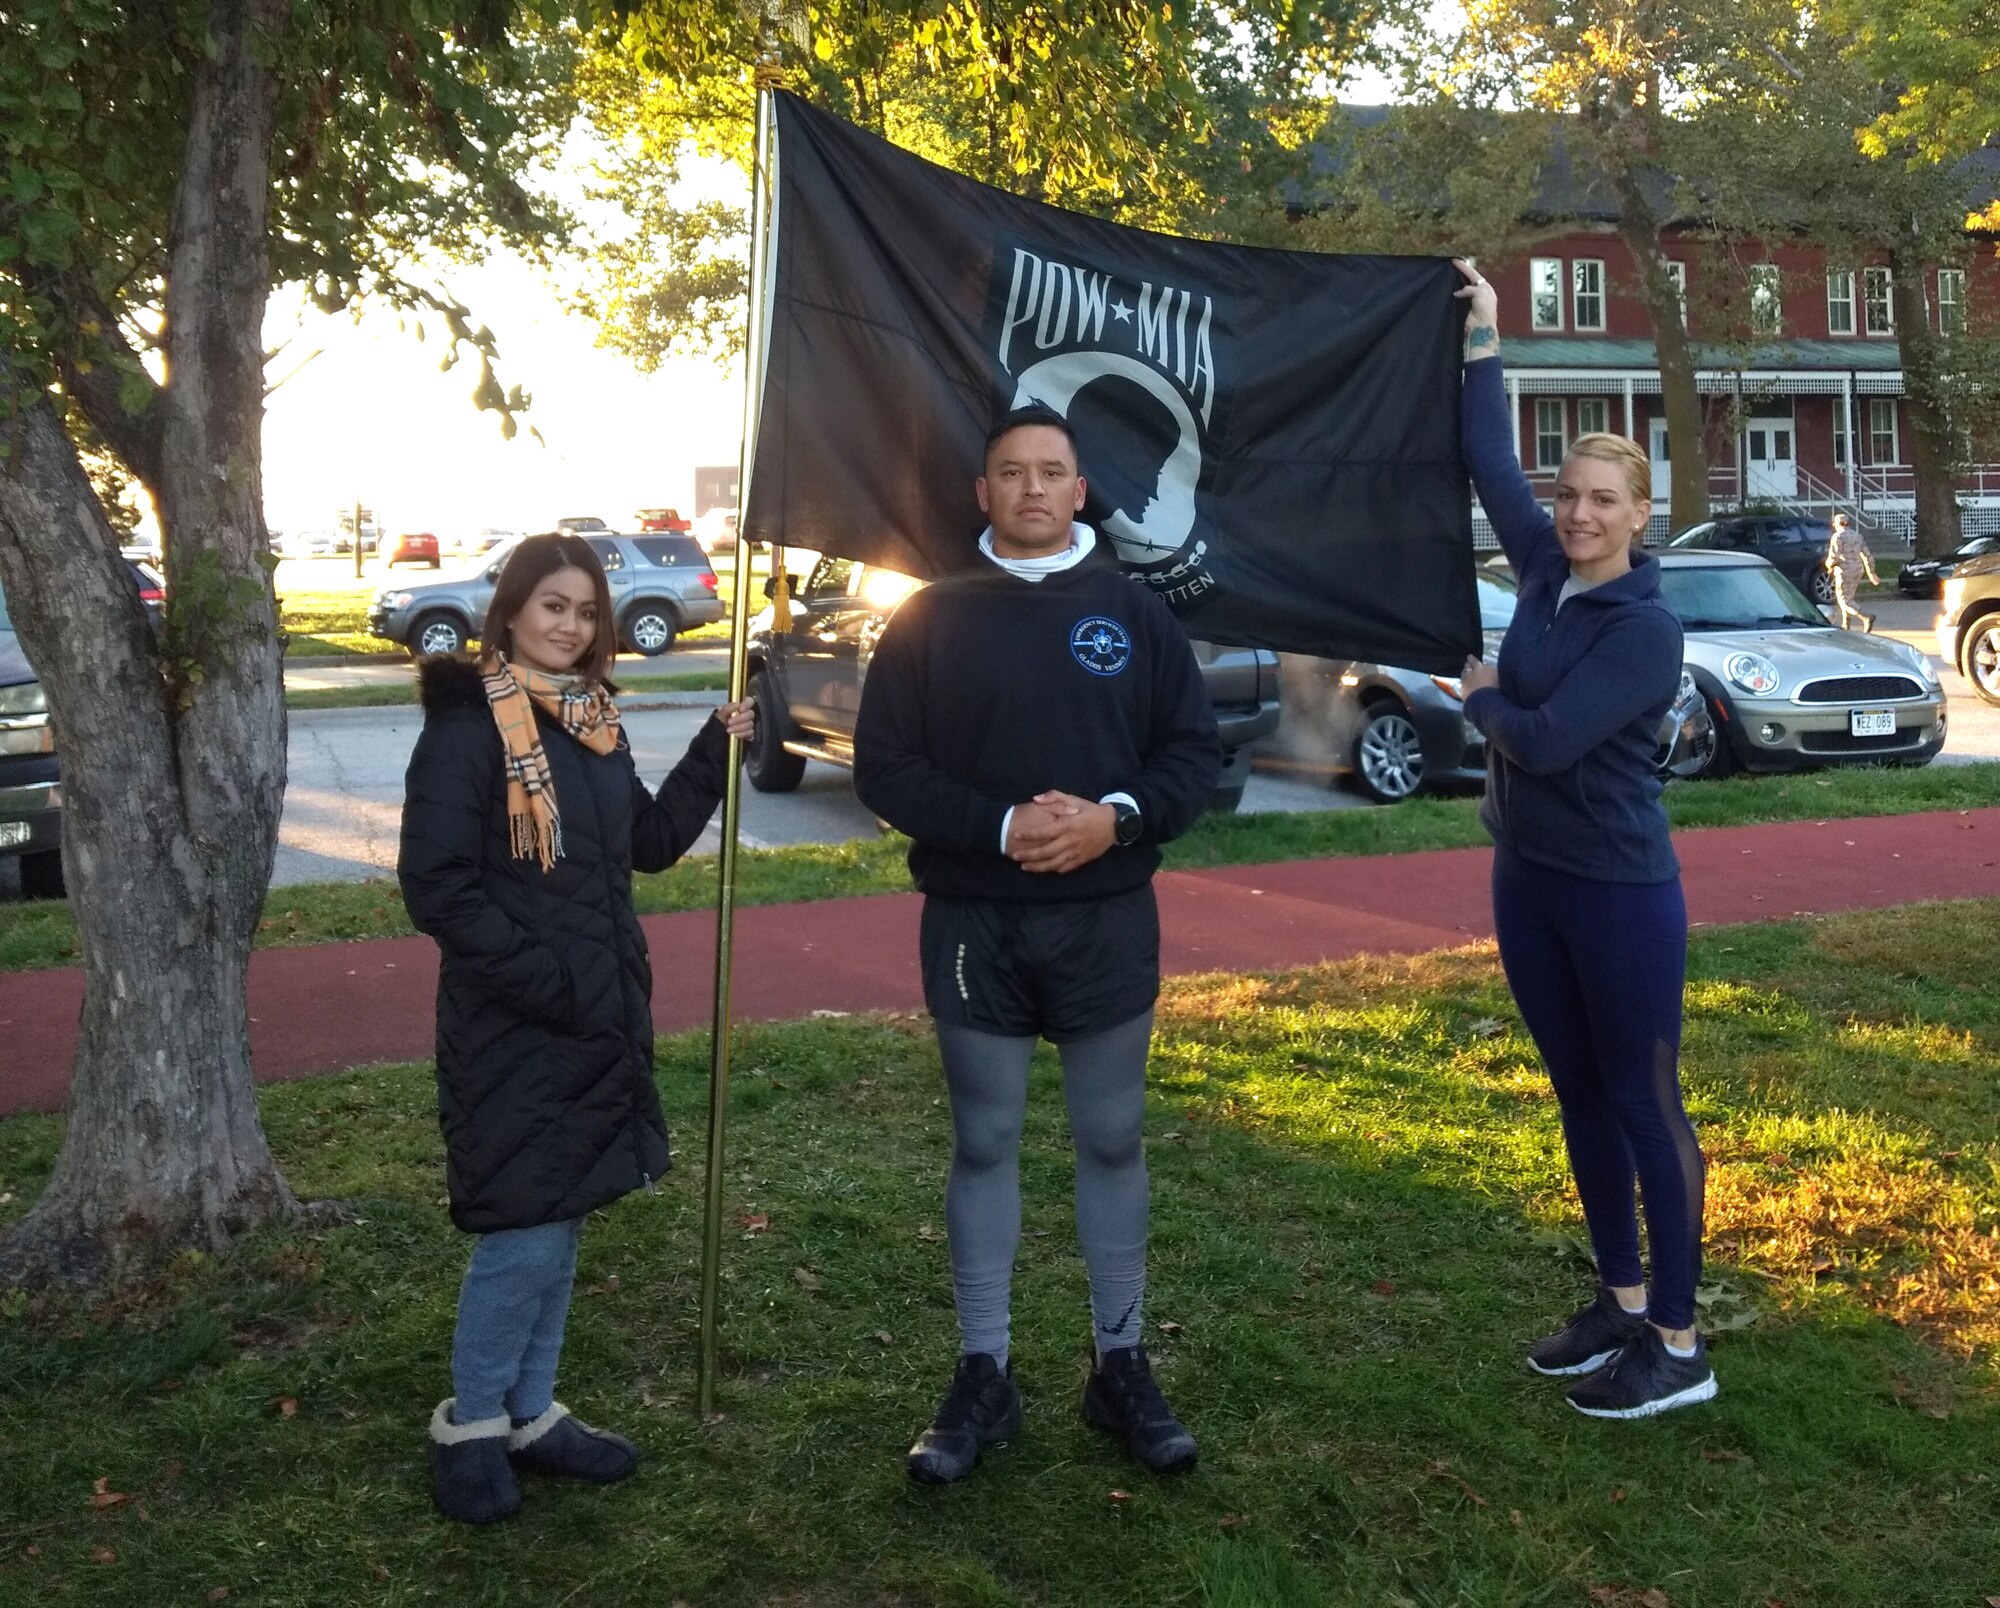 runners pose with POW/MIA flag after running 24 hours